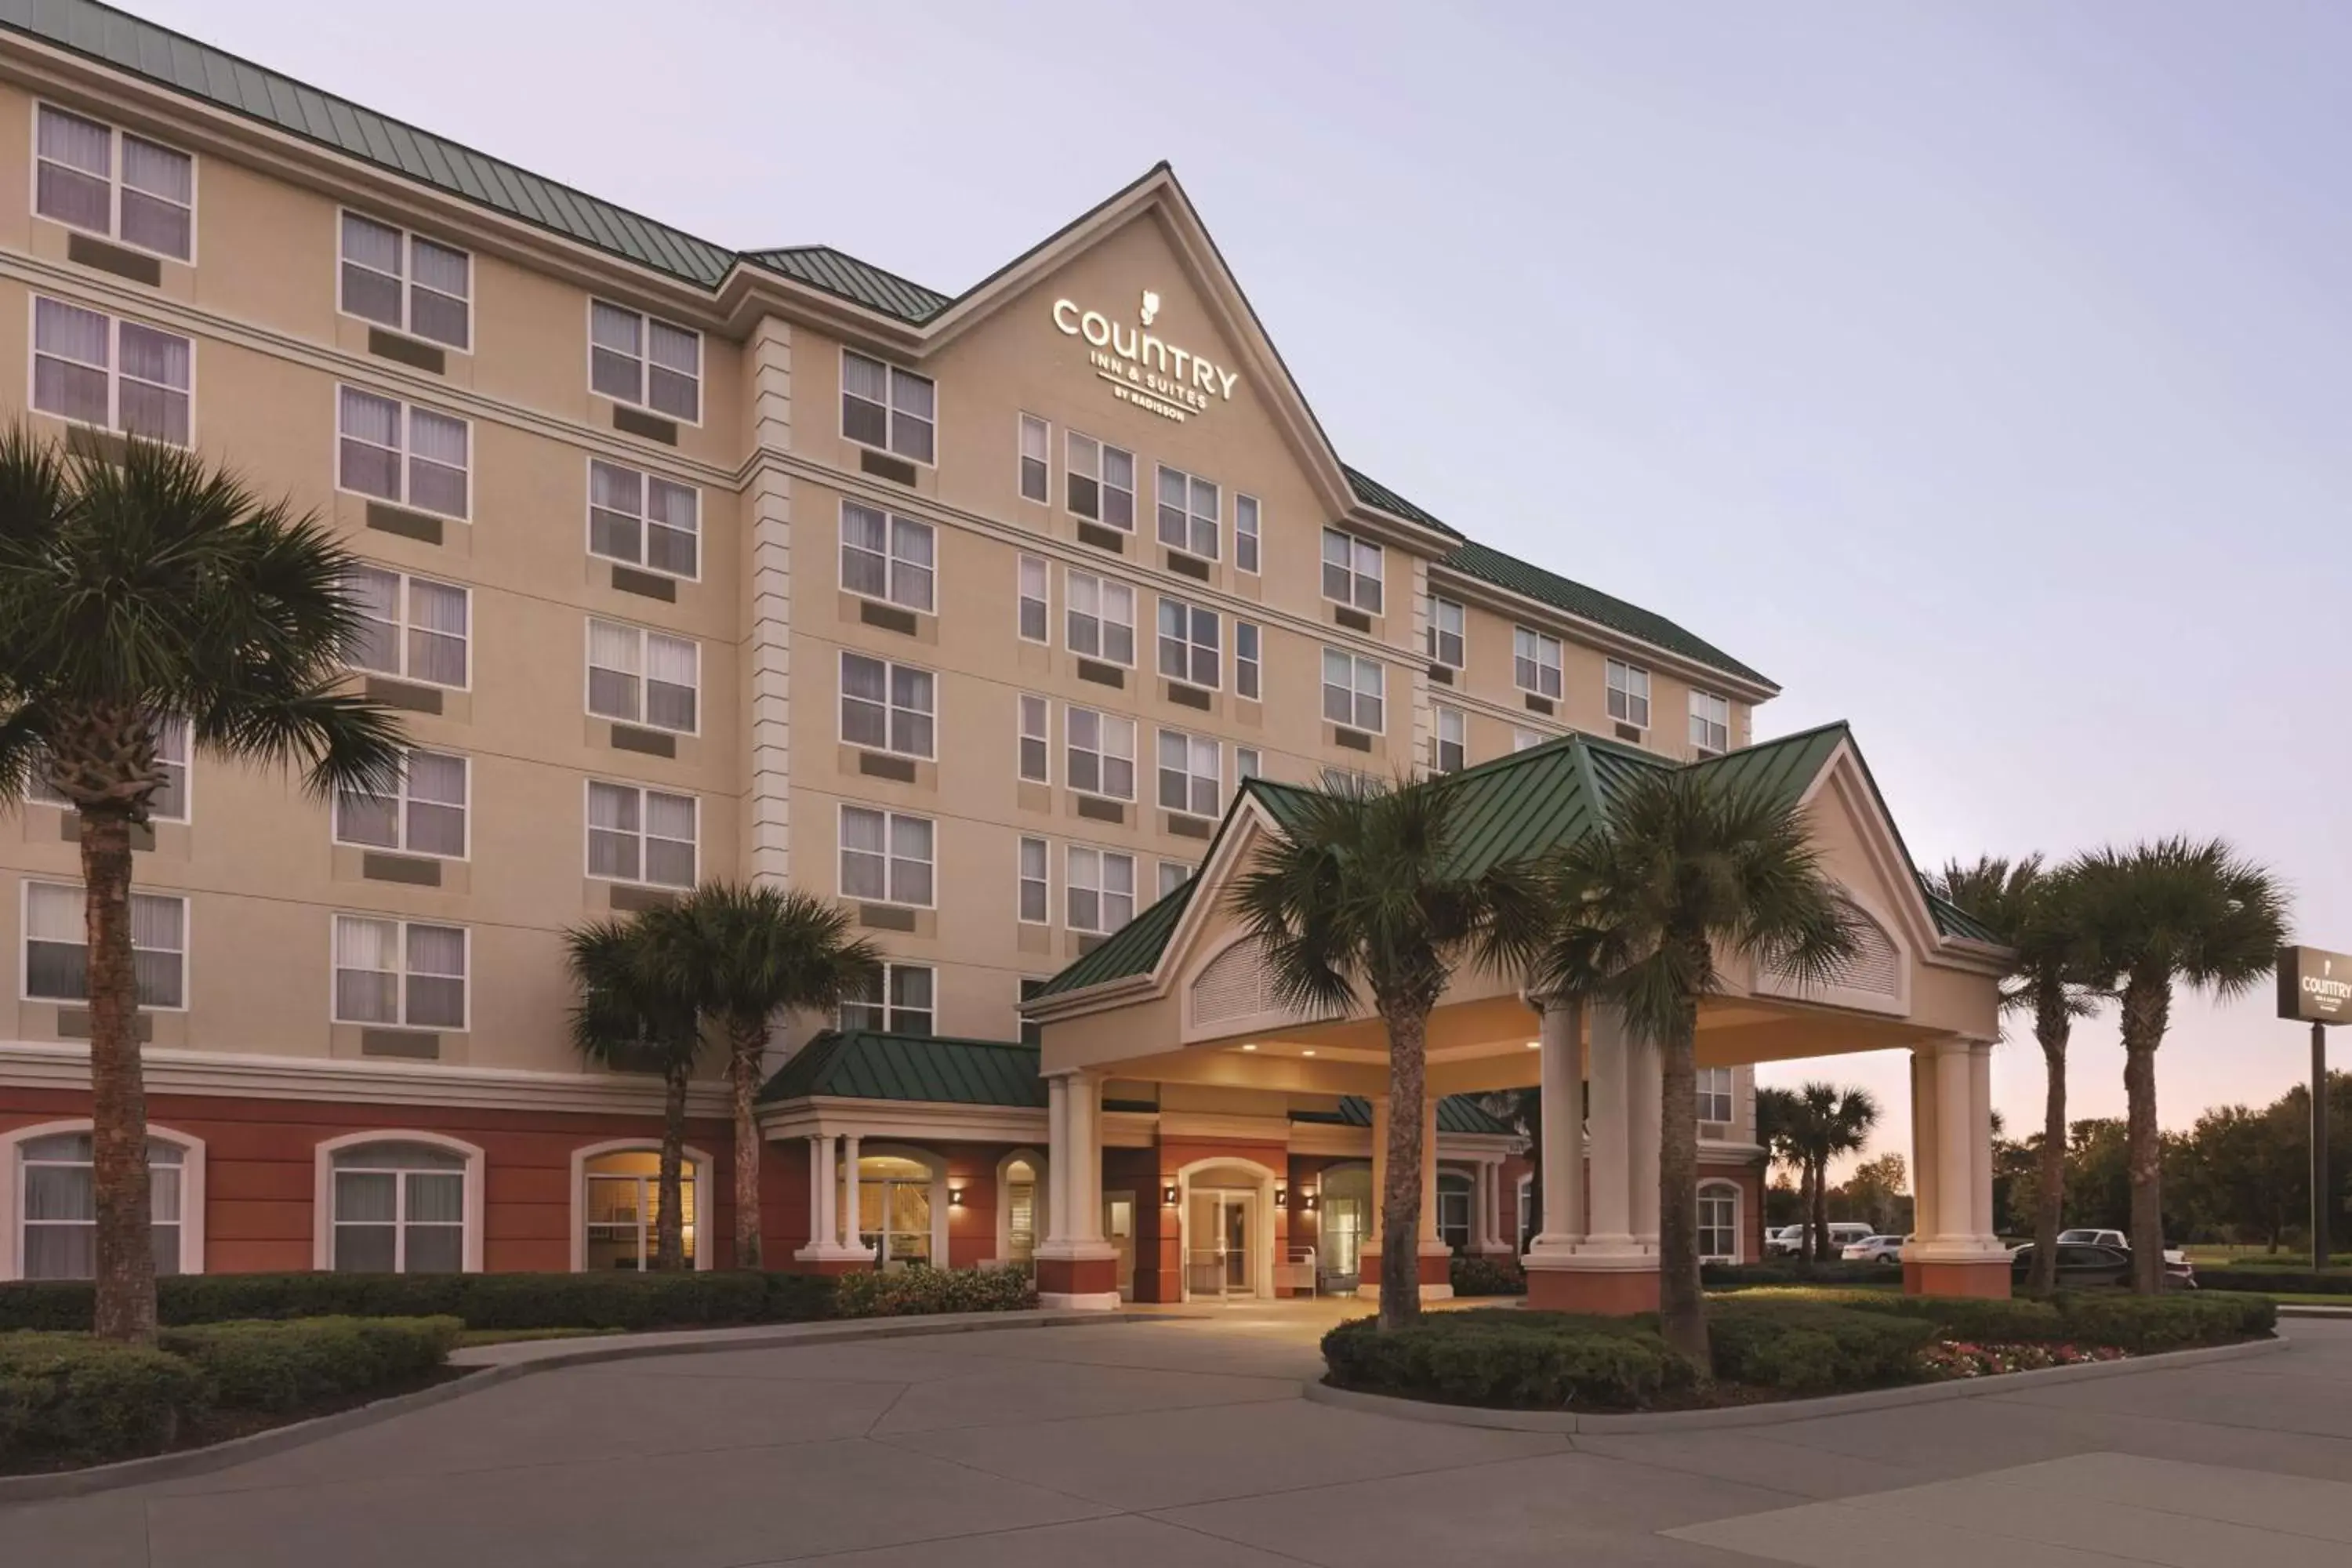 Property Building in Country Inn and Suites Orlando